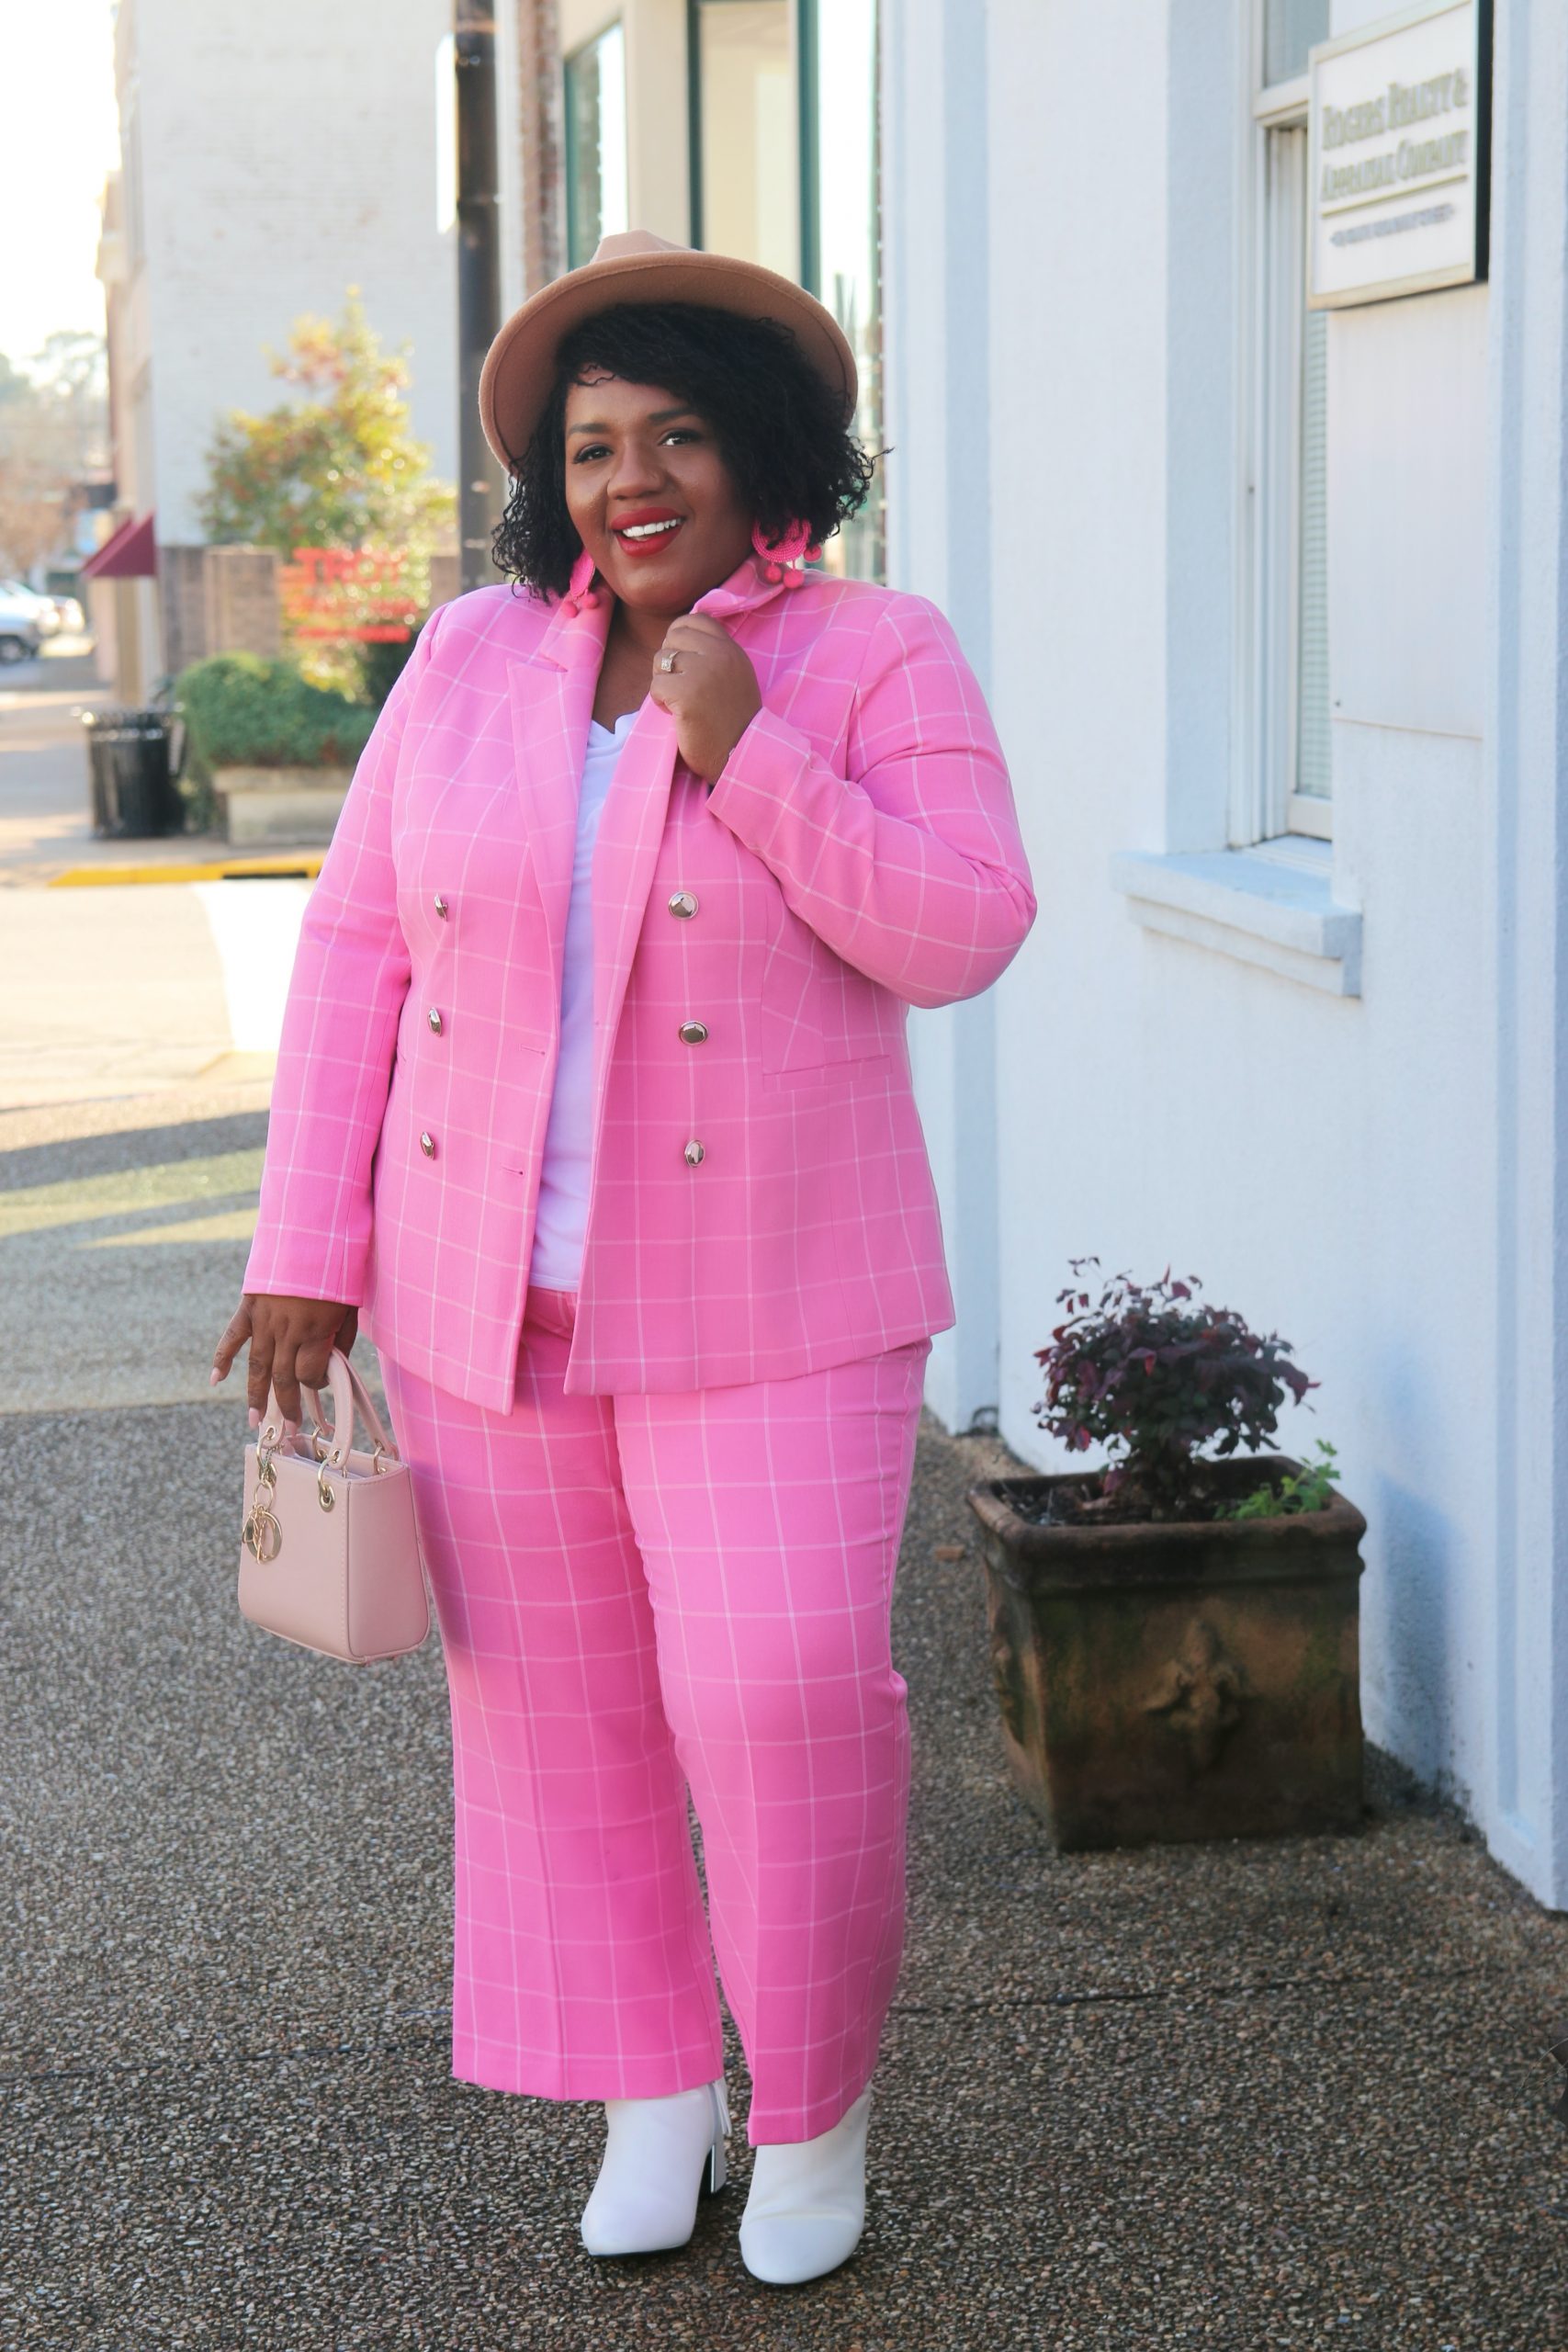 plus size woman in a pink suit set